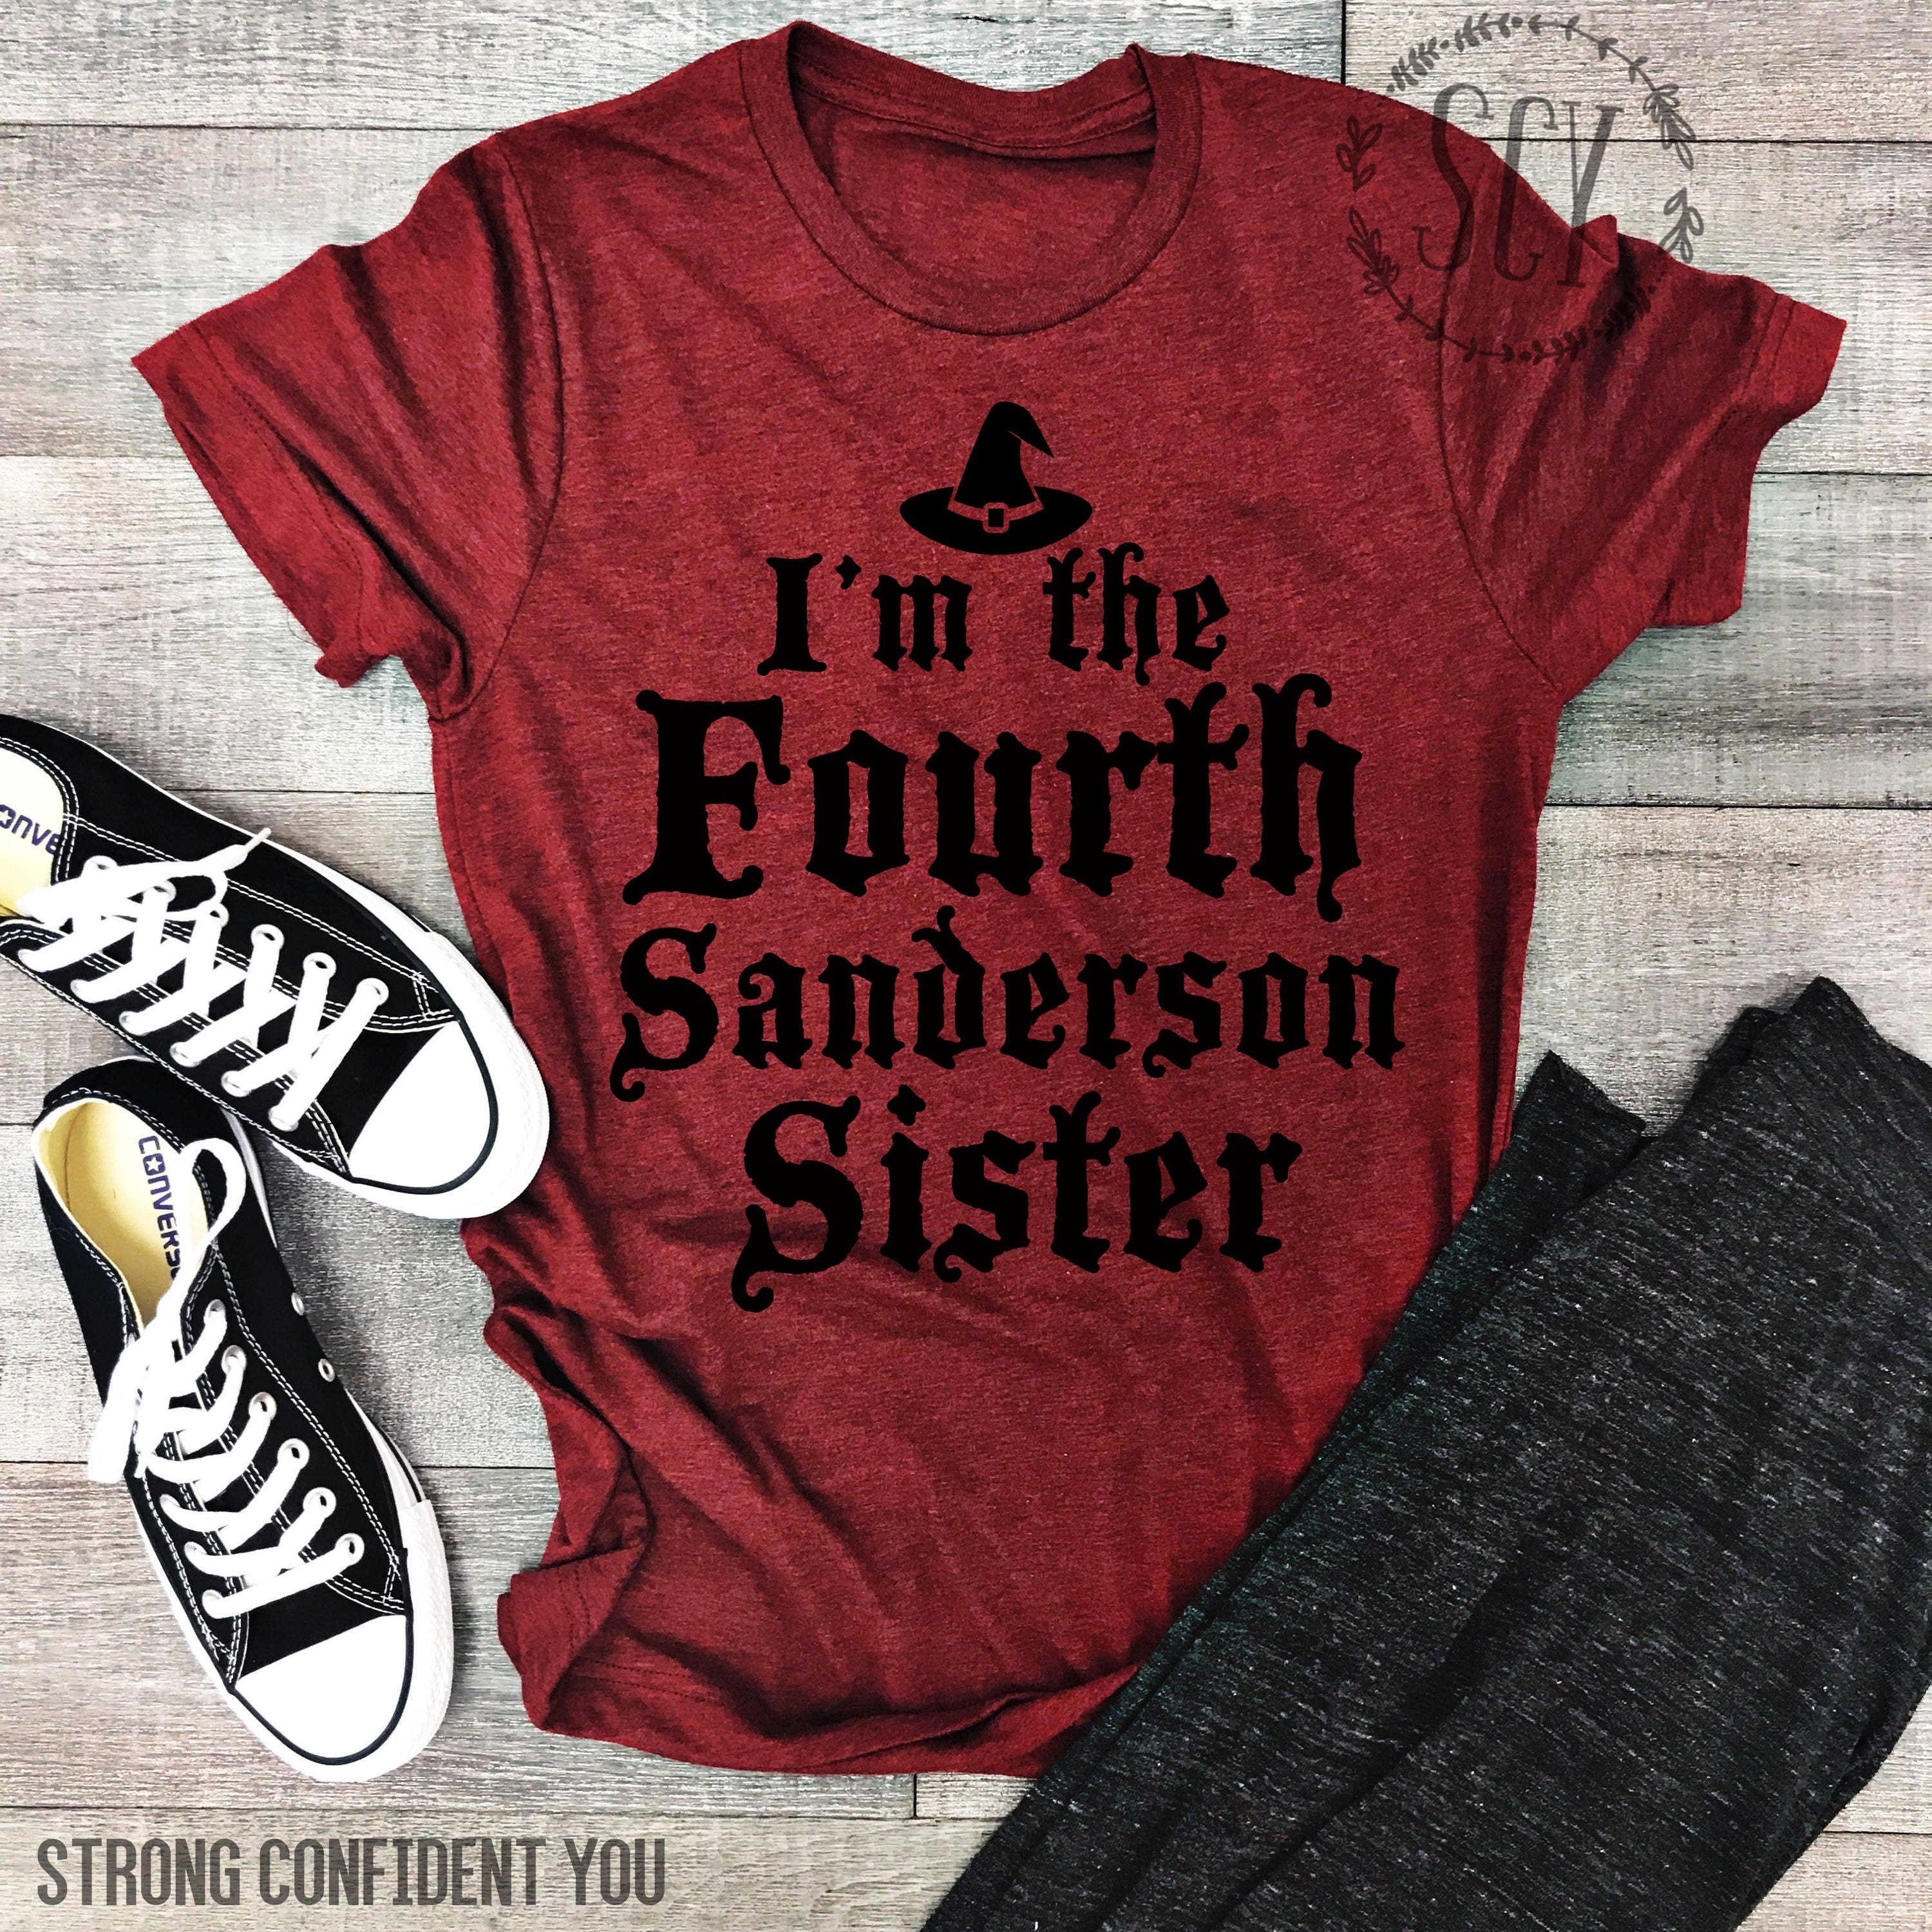 I'm The Fourth Sanderson Sister, Halloween Shirt, Witch Shirt, T-Shirt, Holiday Shirt, Funny Shirt, Trick or Treat